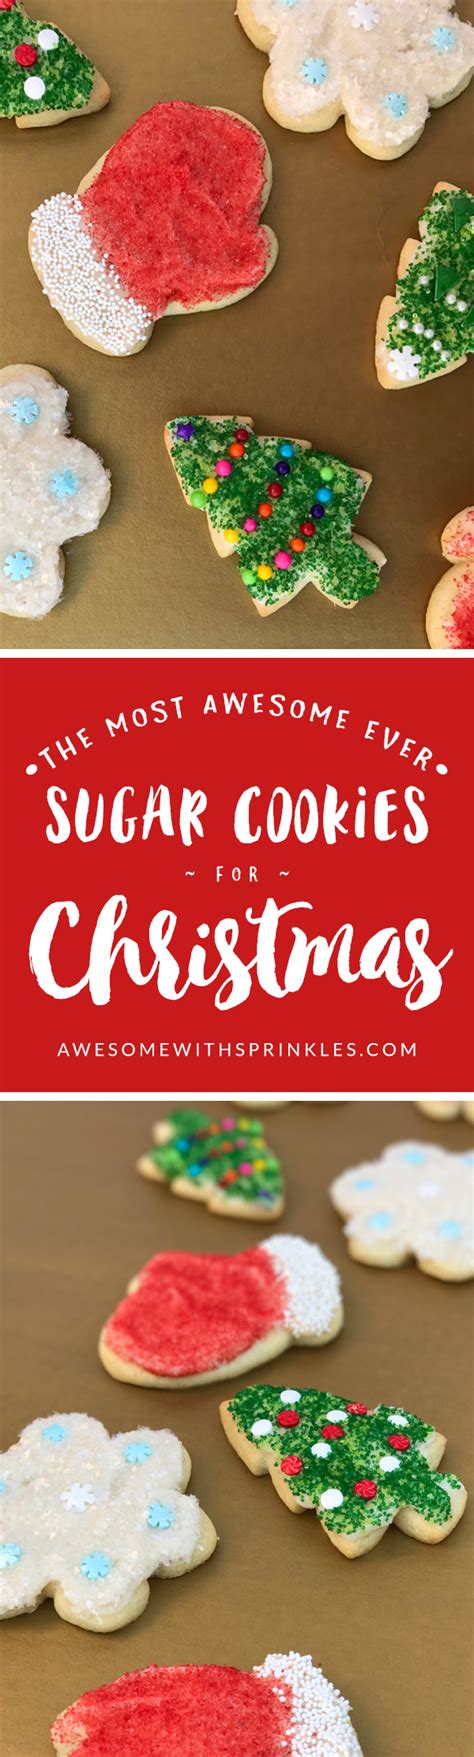 The Most Awesome Ever Sugar Cookies For Chirstmas Awesome With